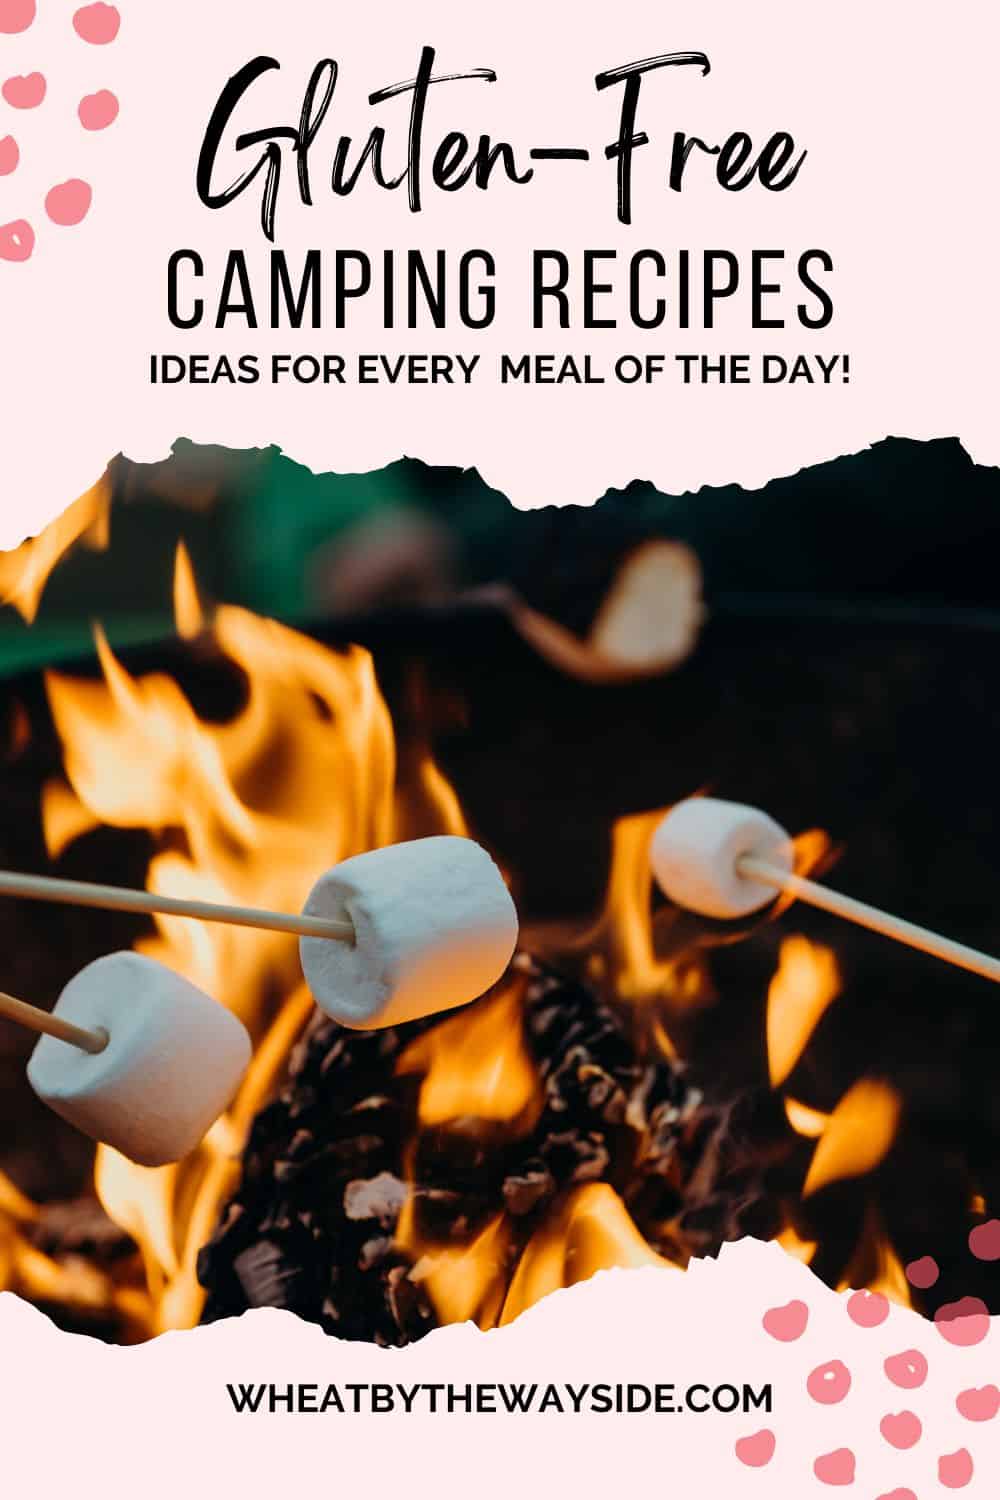 Marshmallows on sticks roasting over a fire, text overlay gluten free camping recipes, ideas for every meal of the day.